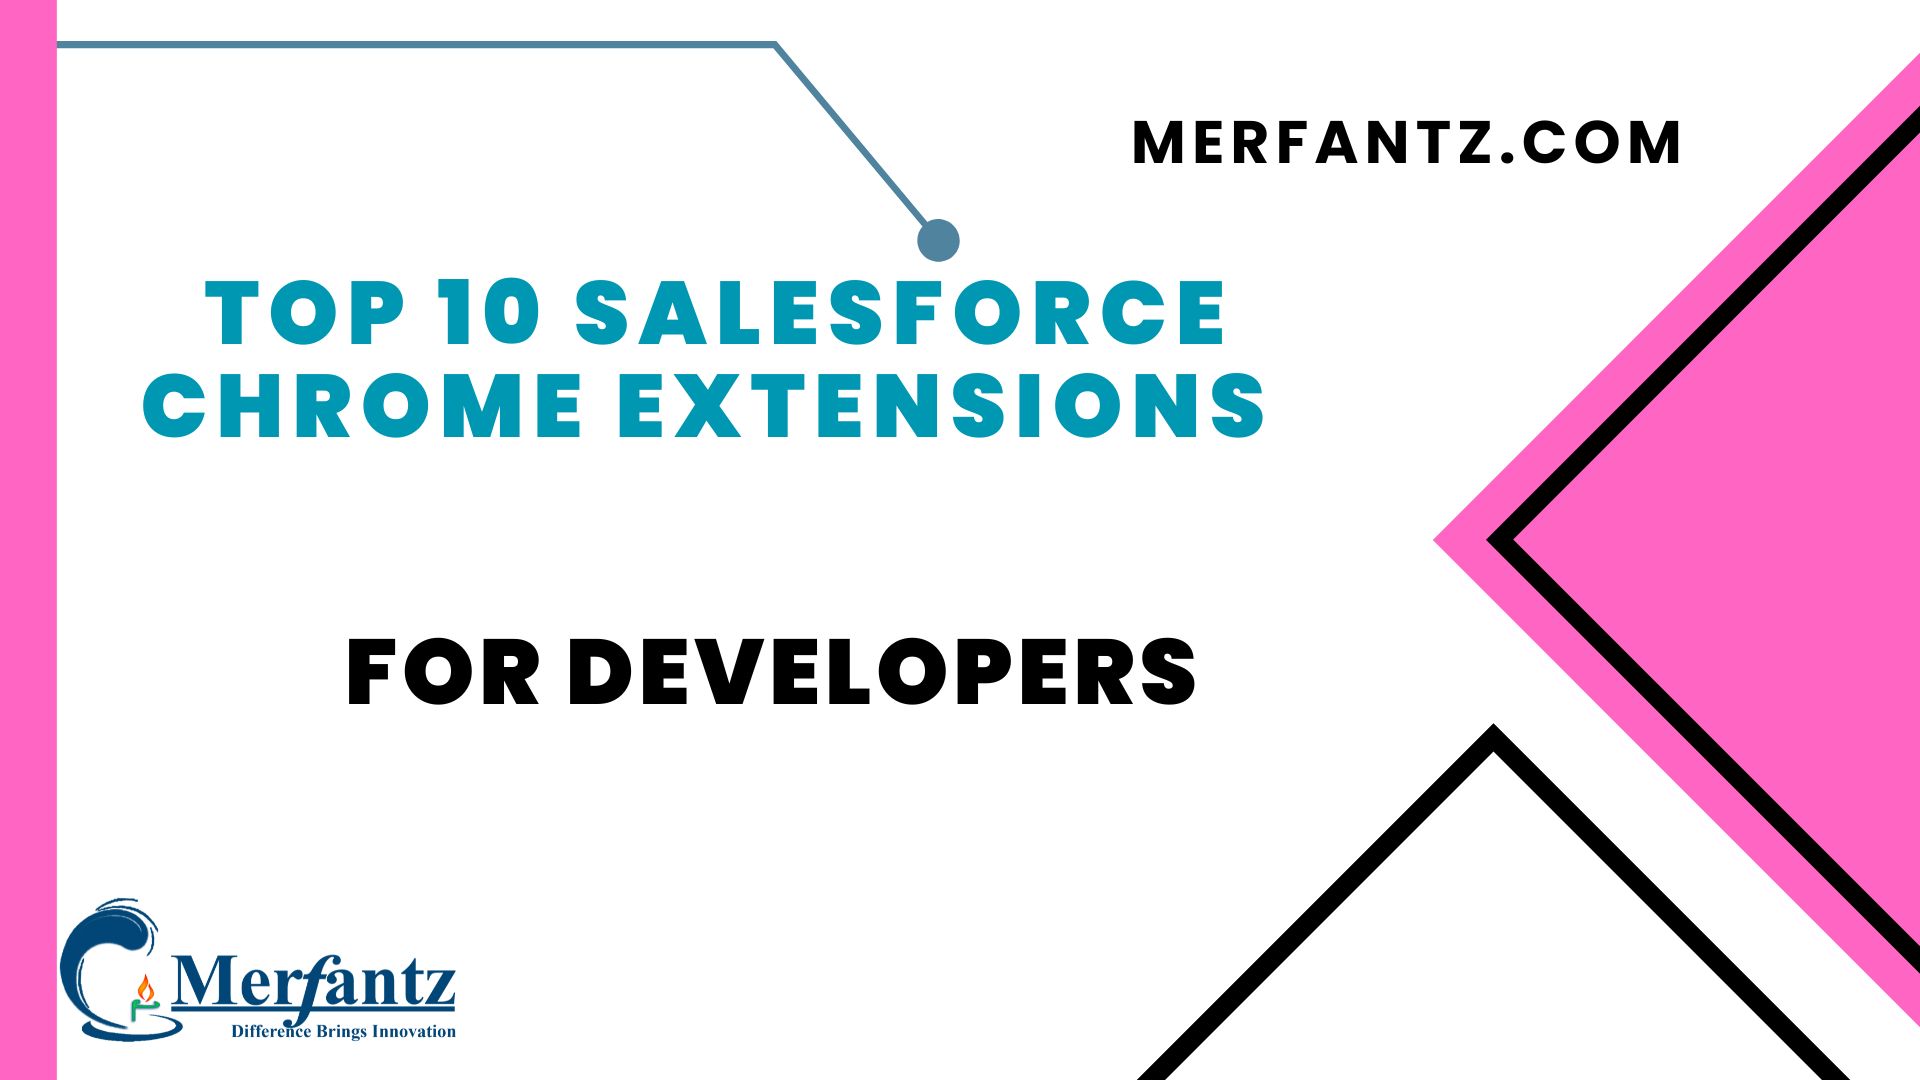 Top 10 Salesforce Chrome Extensions for Developers